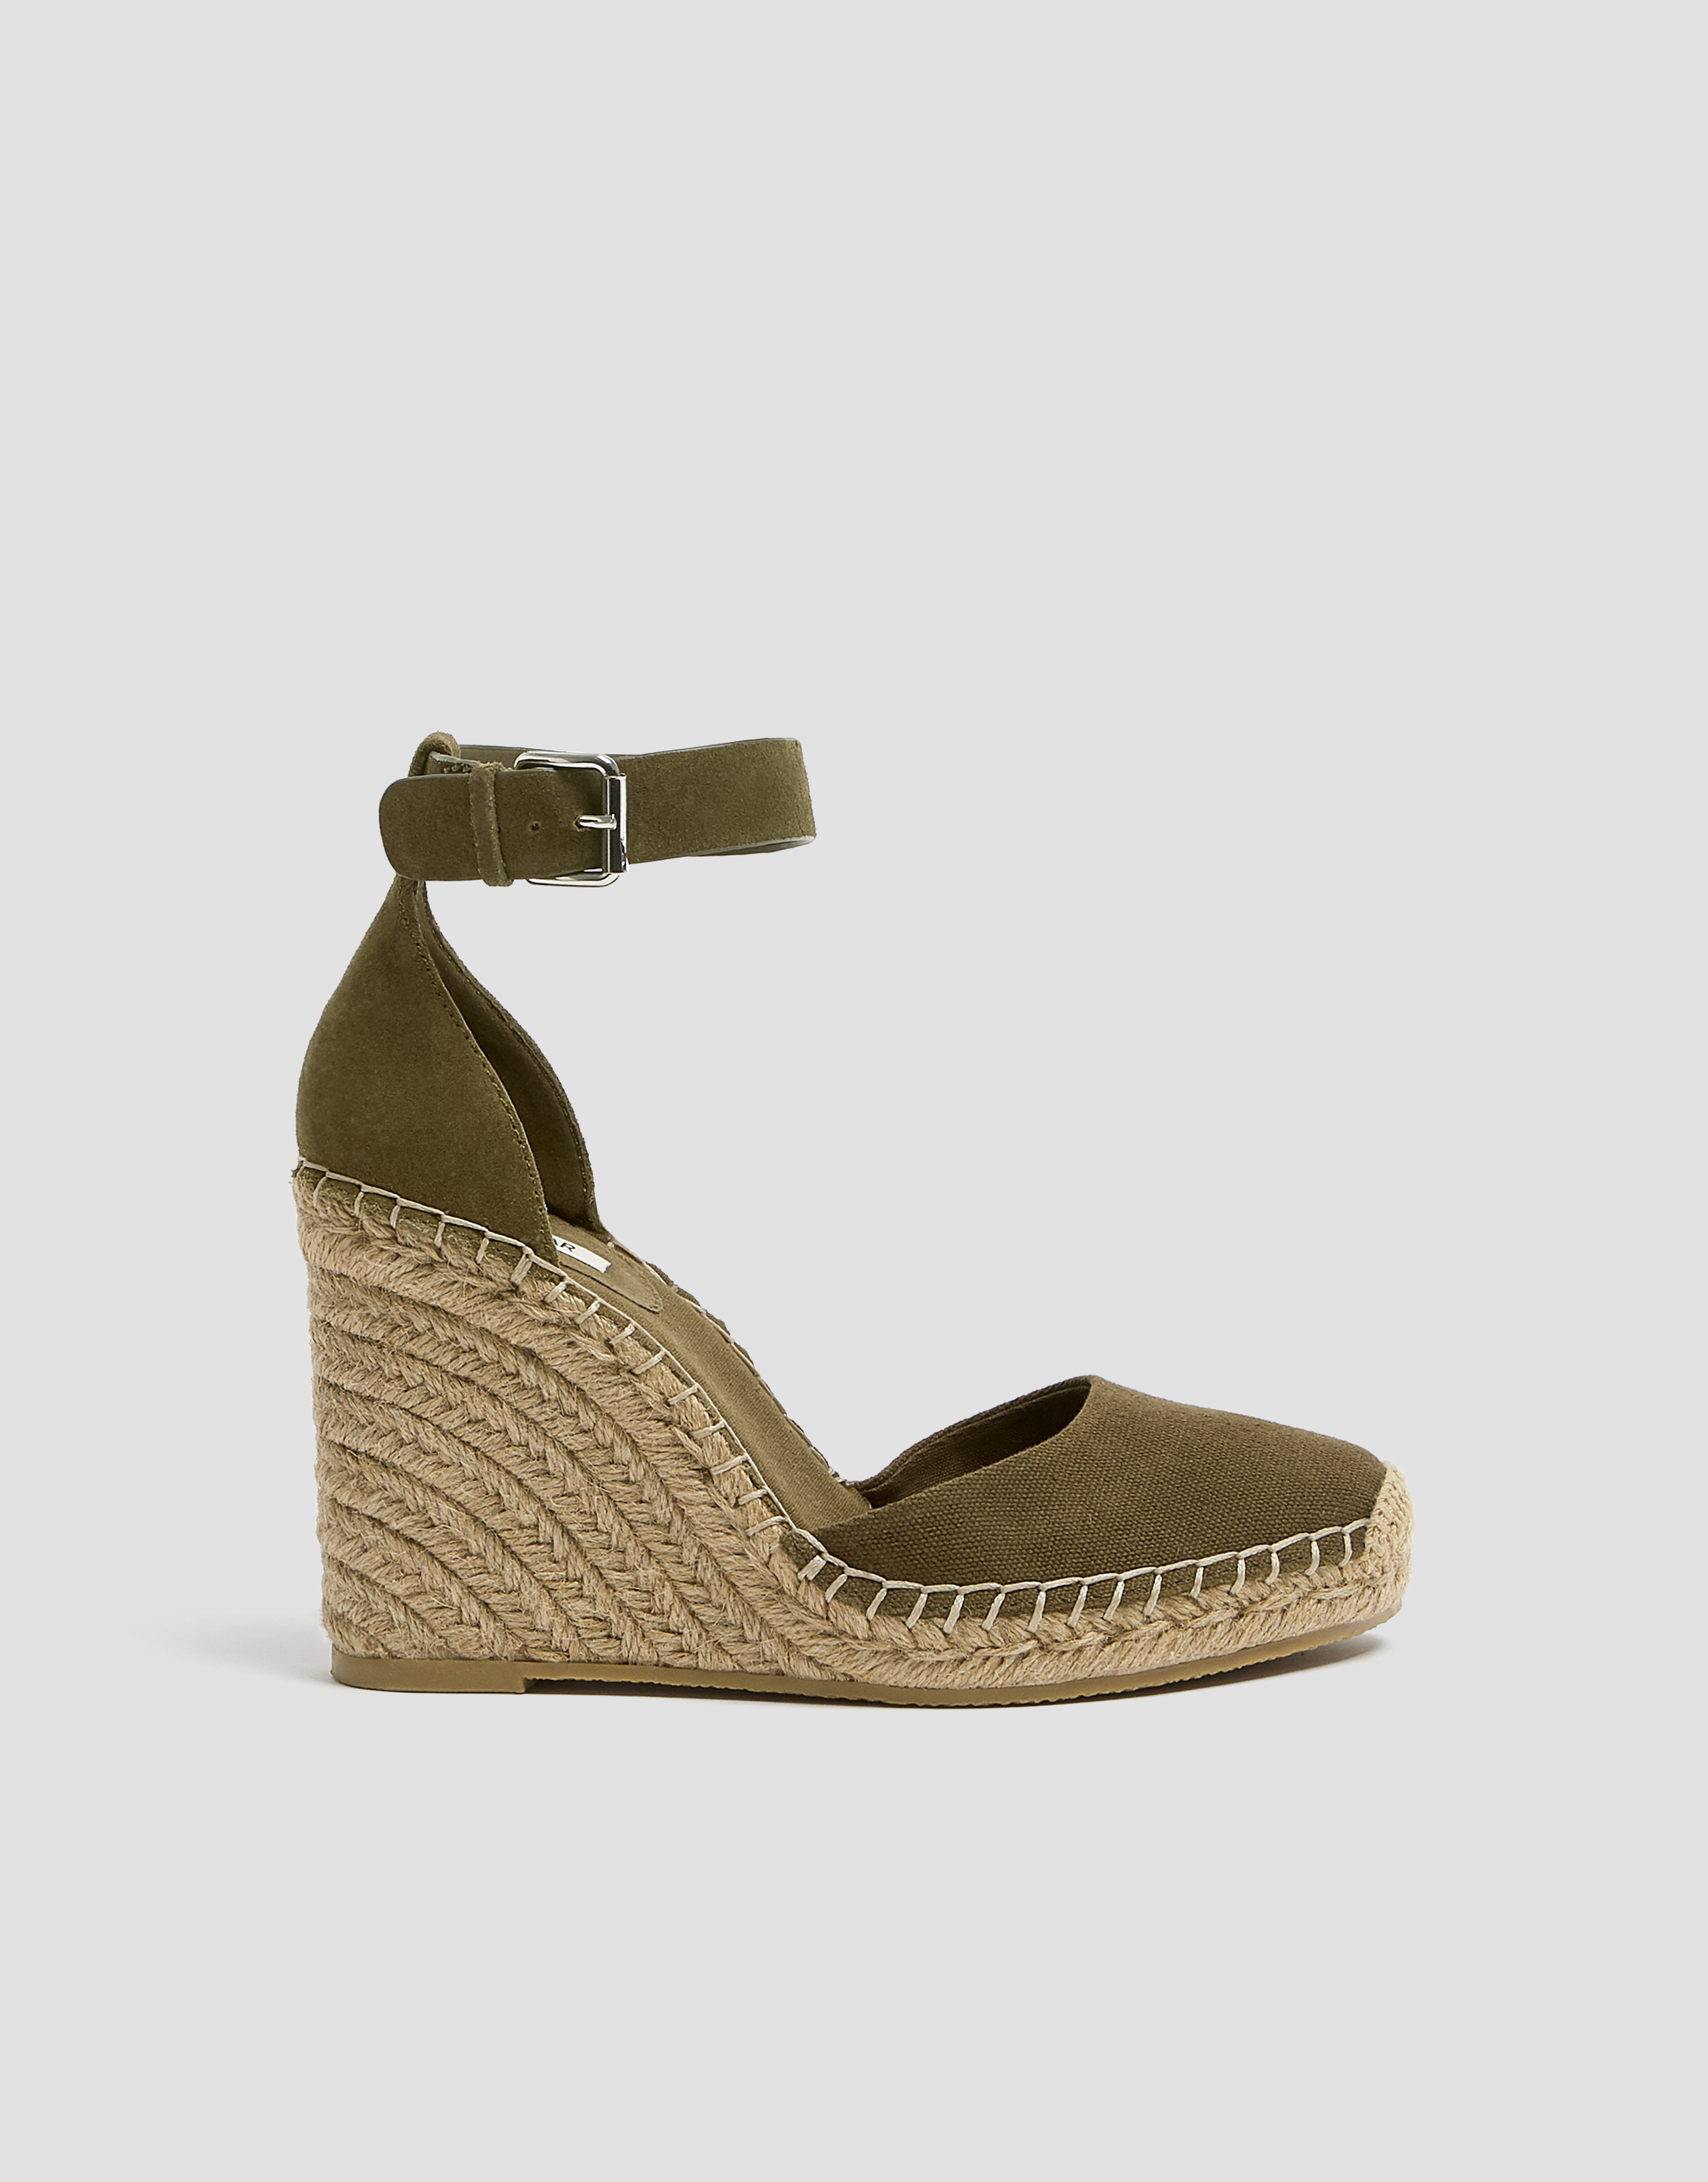 wedges with strap around ankle